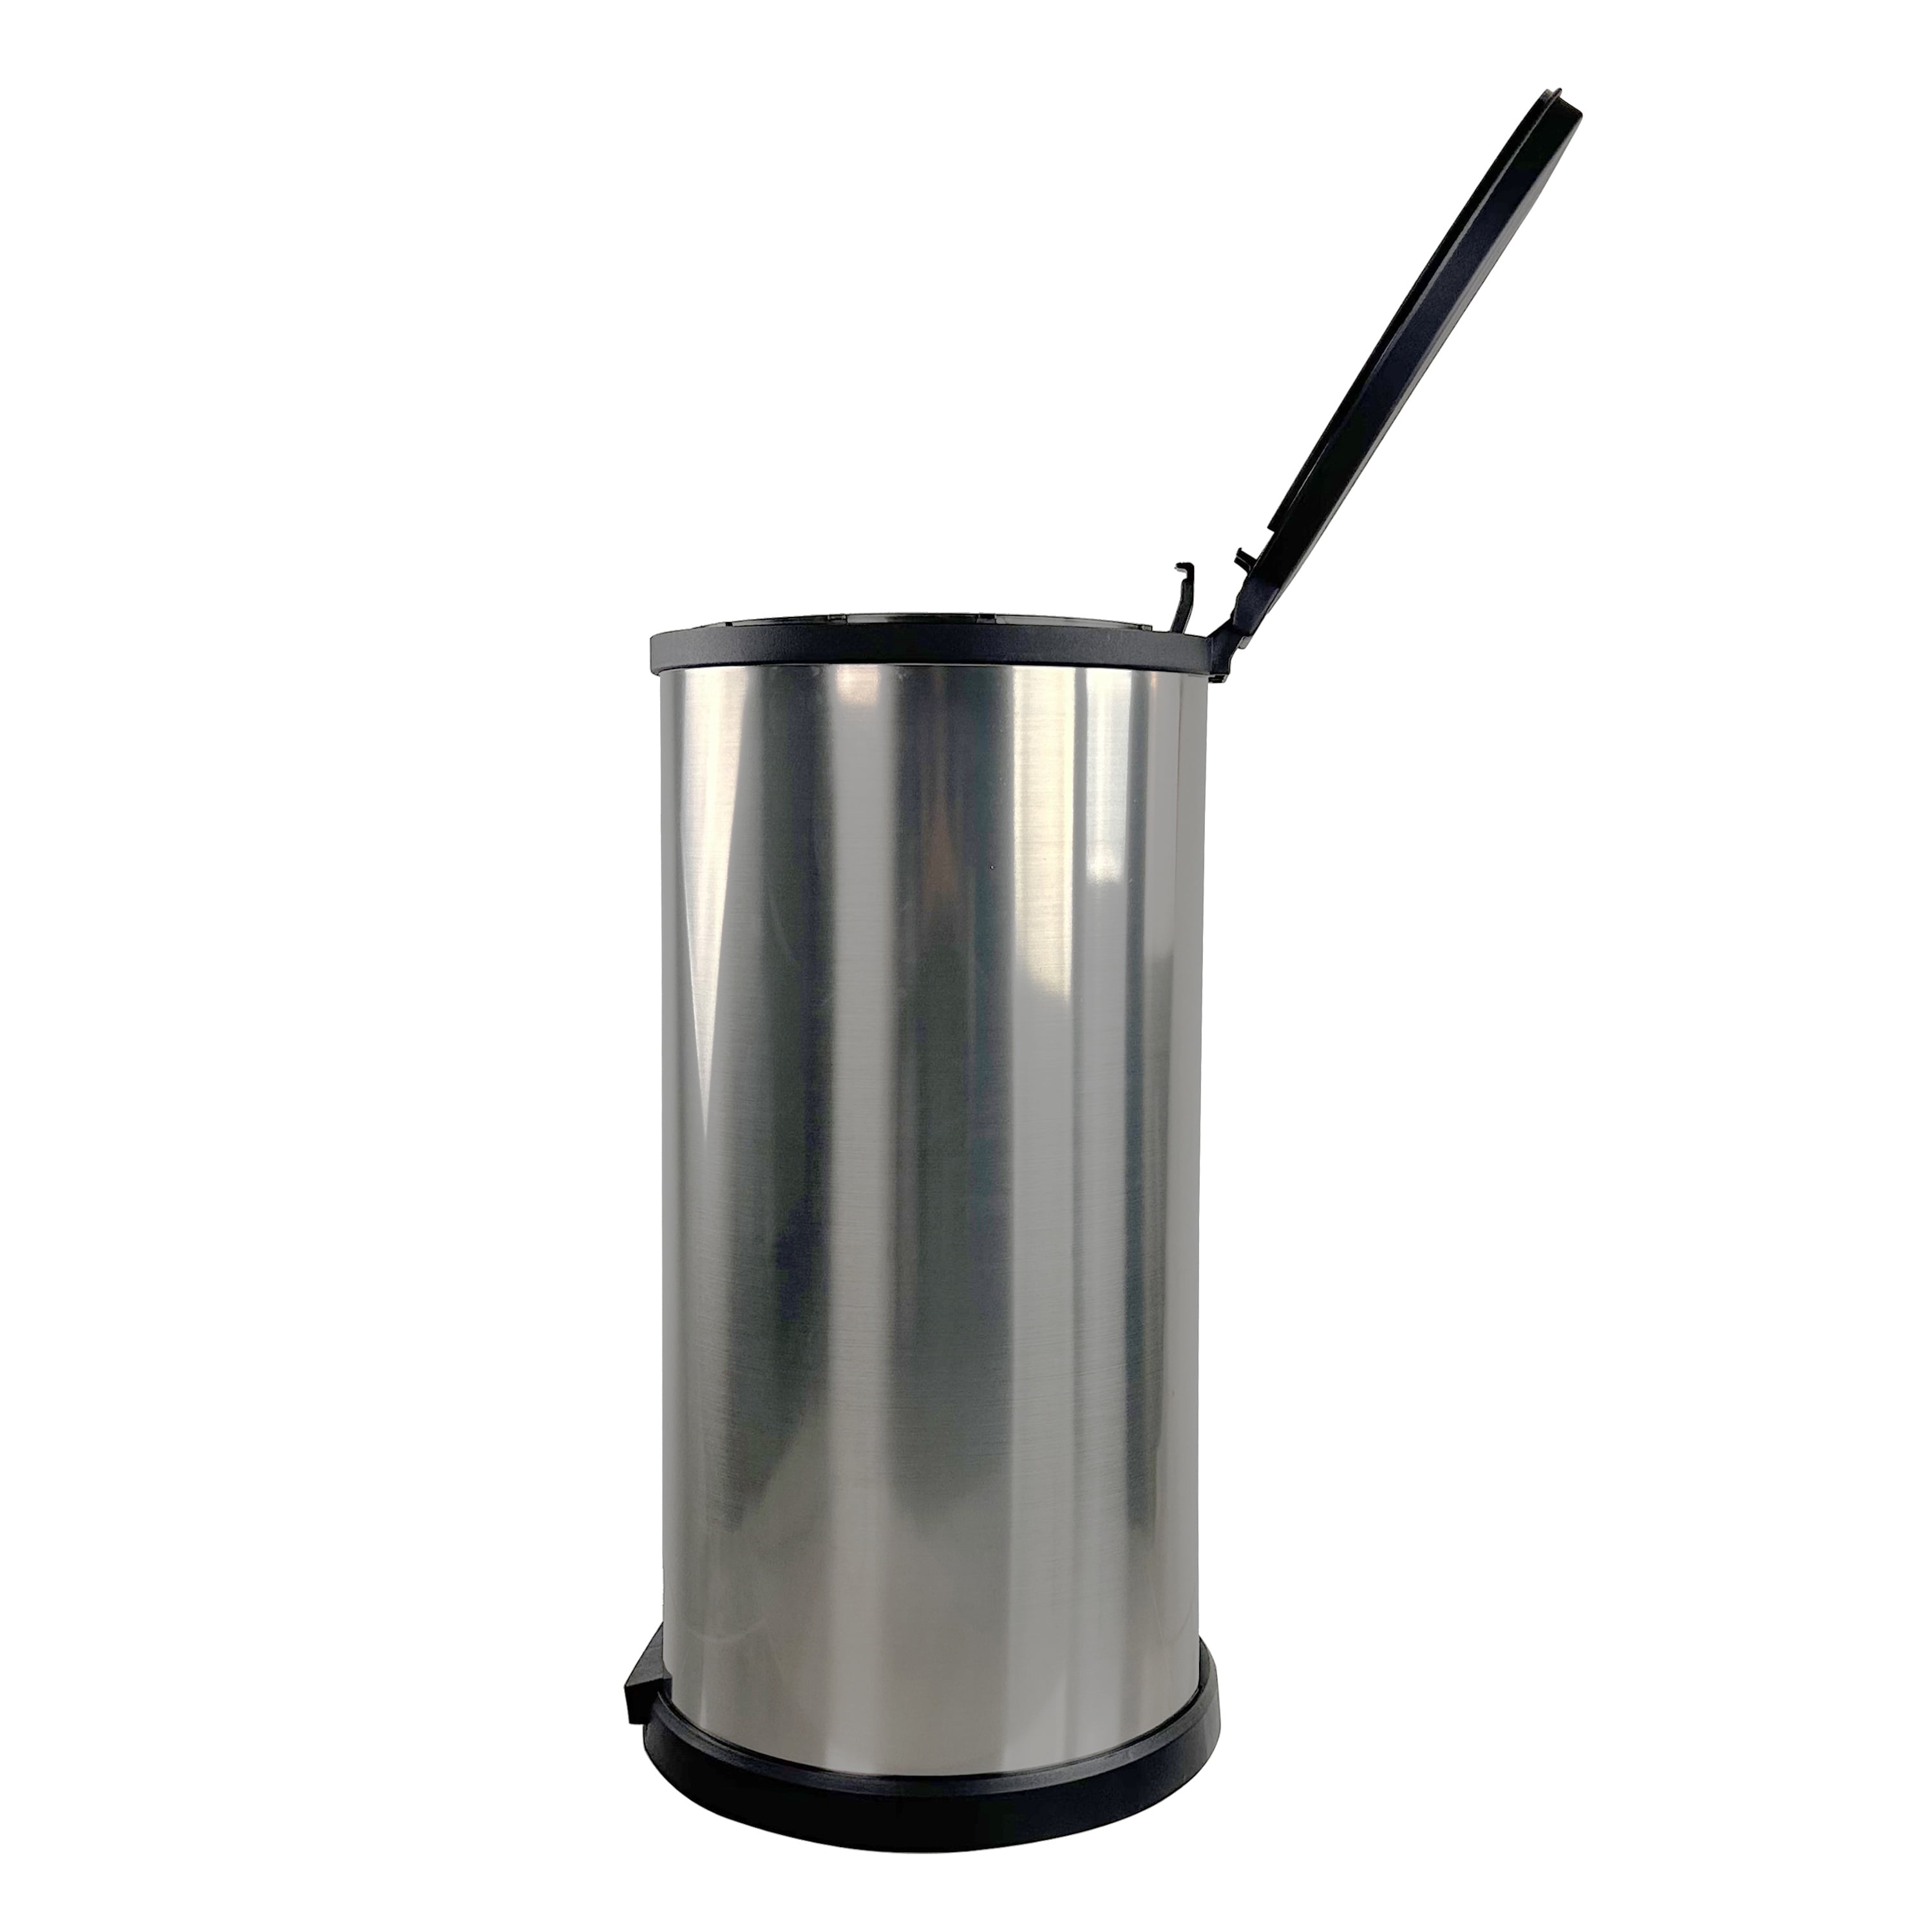 Mainstays 7.9 gal / 30 L Round Stainless Steel Office Garbage Can with Lid